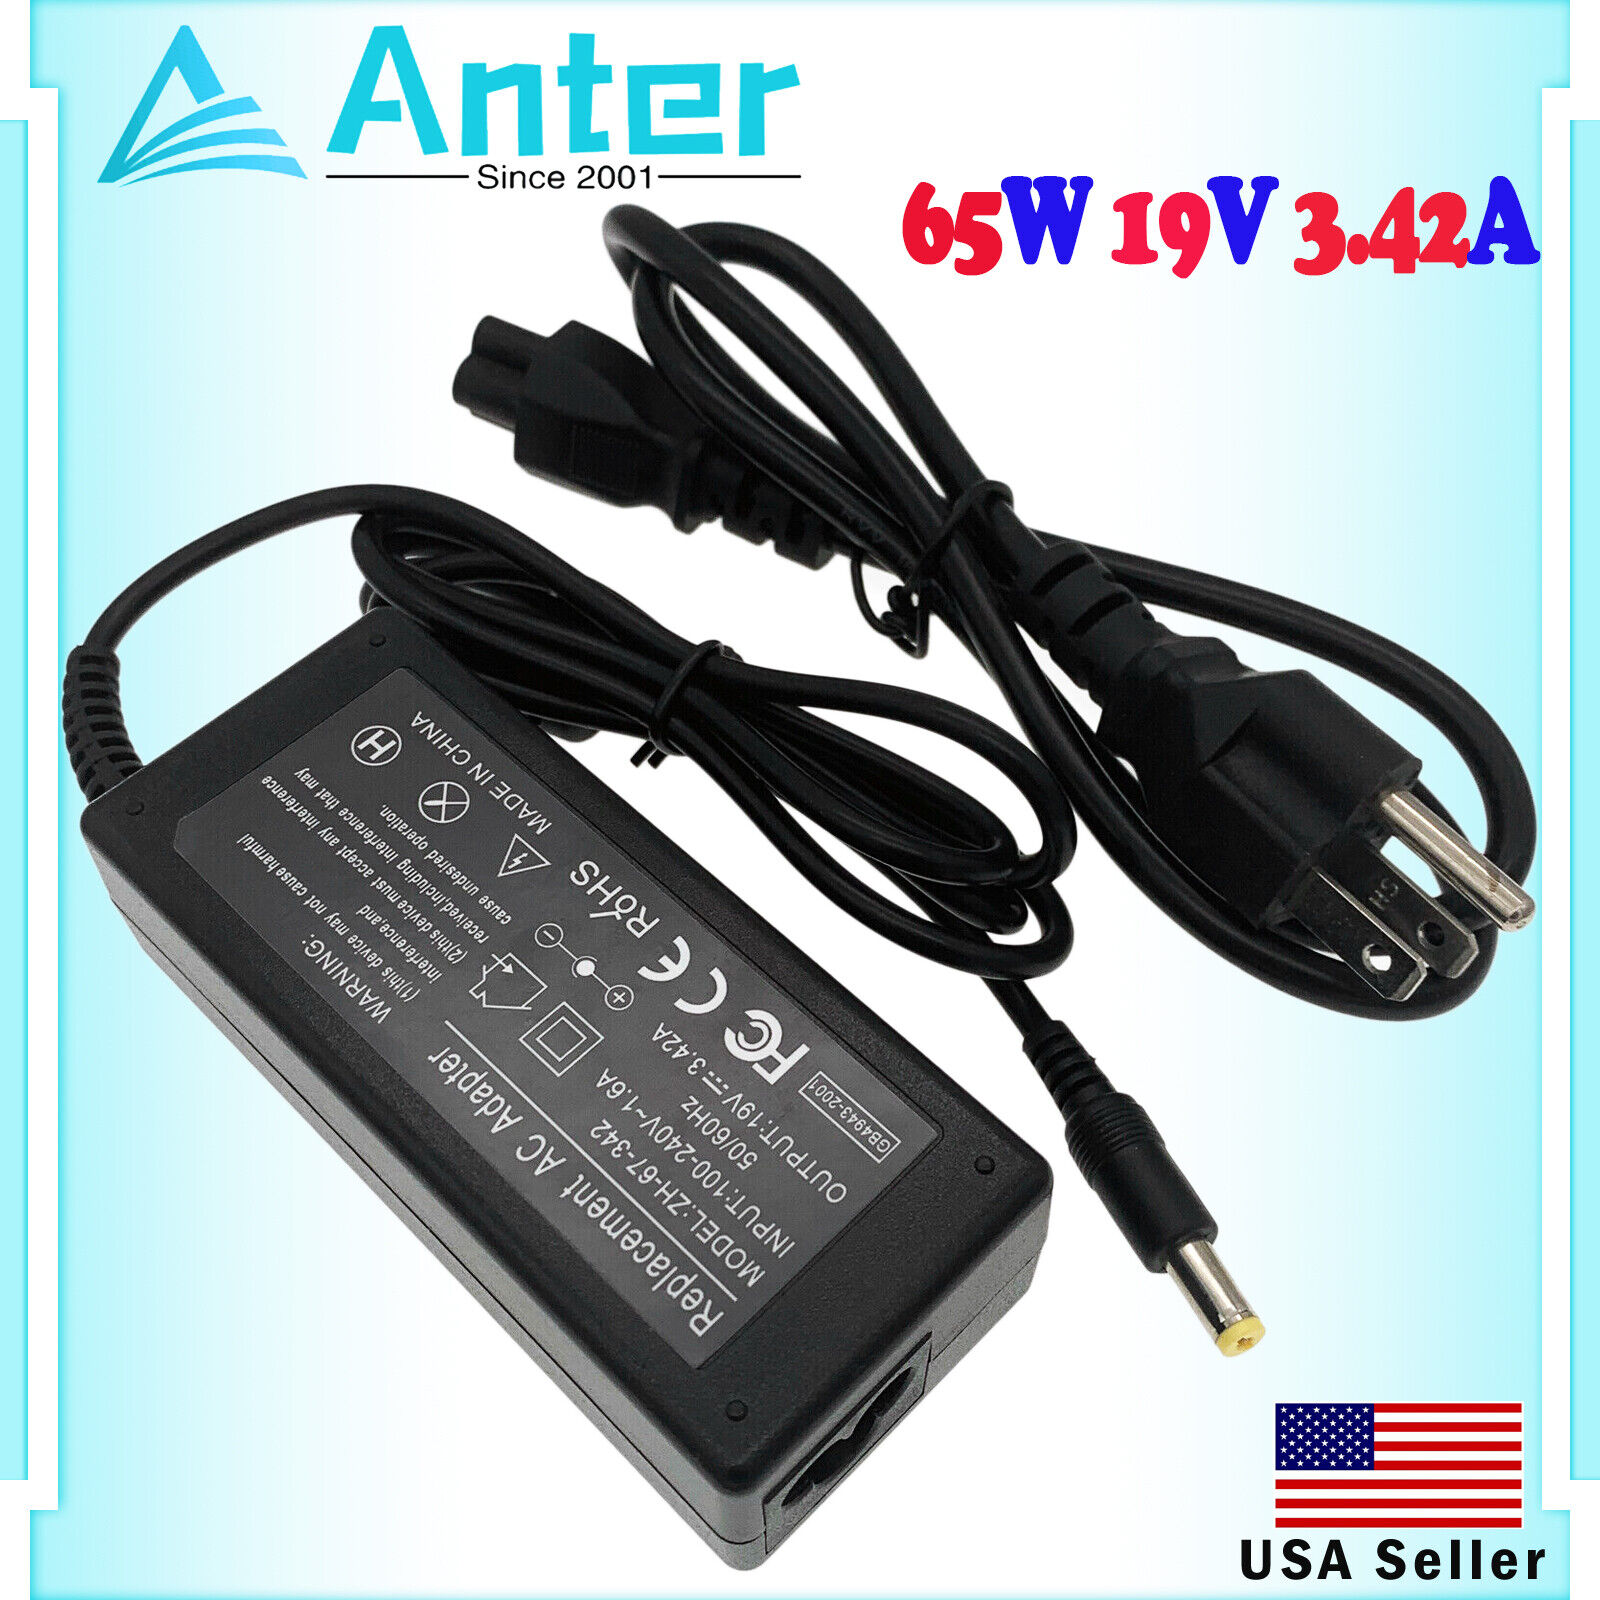 For Acer Aspire ZC-700G AiO desktop power supply ac adapter cord cable charger